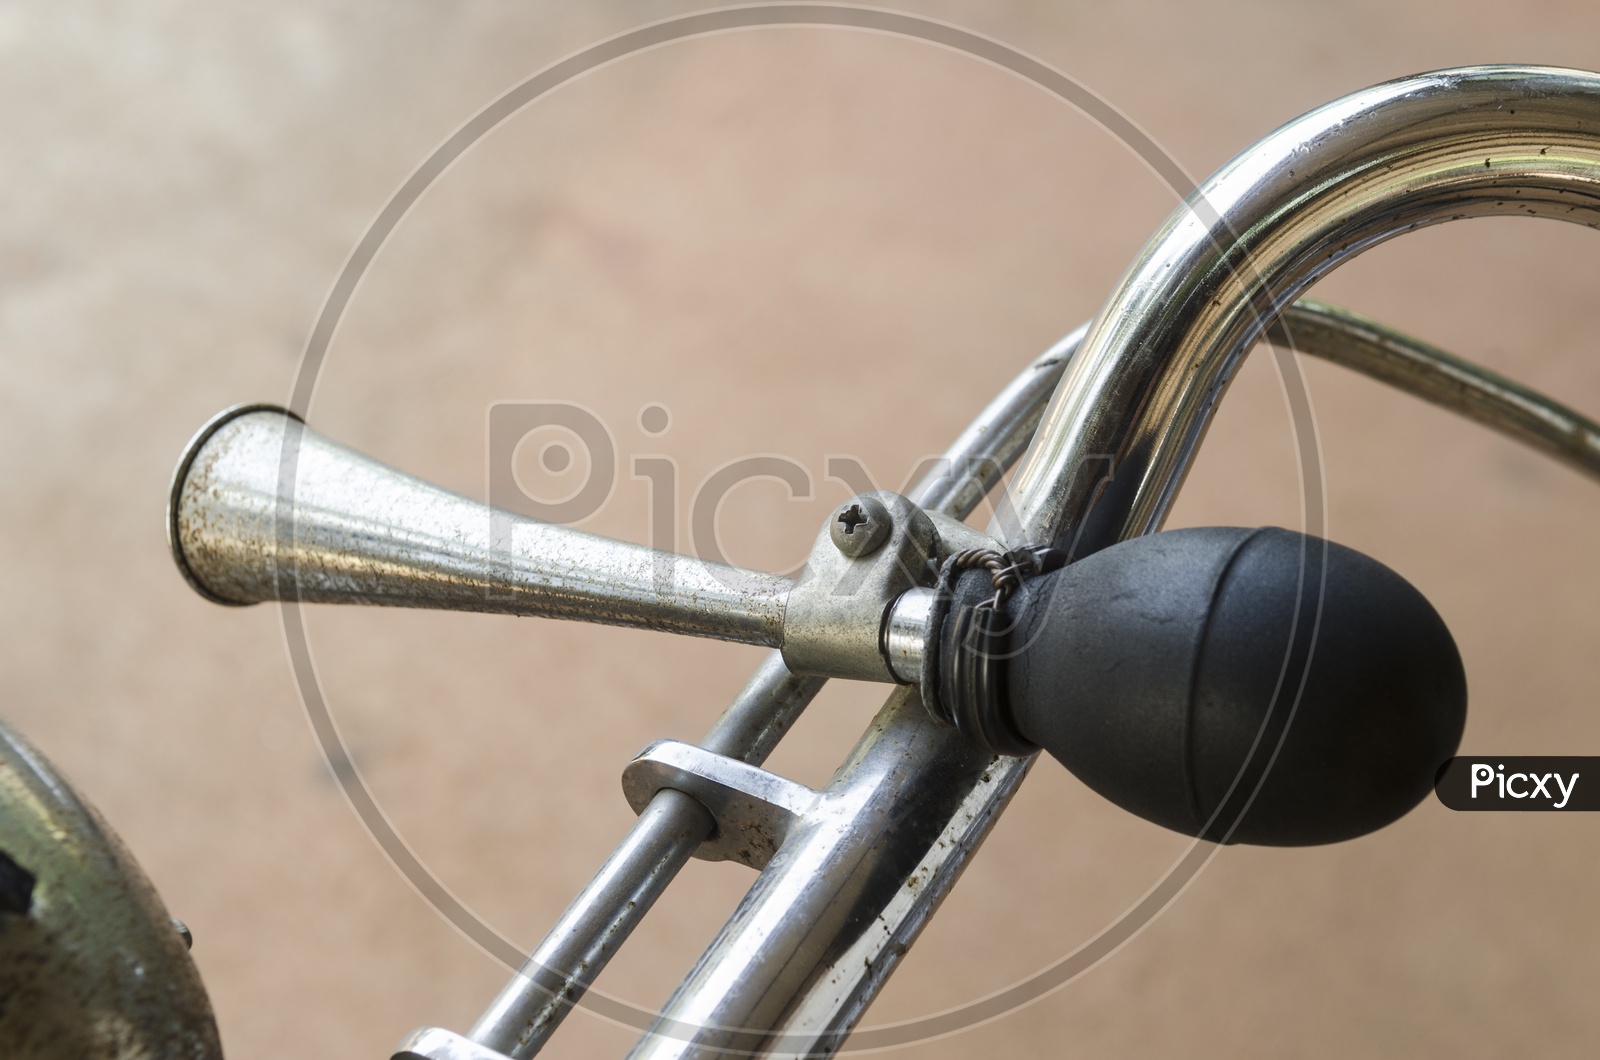 Horn and Handle Bar Of a Vintage Bicycle